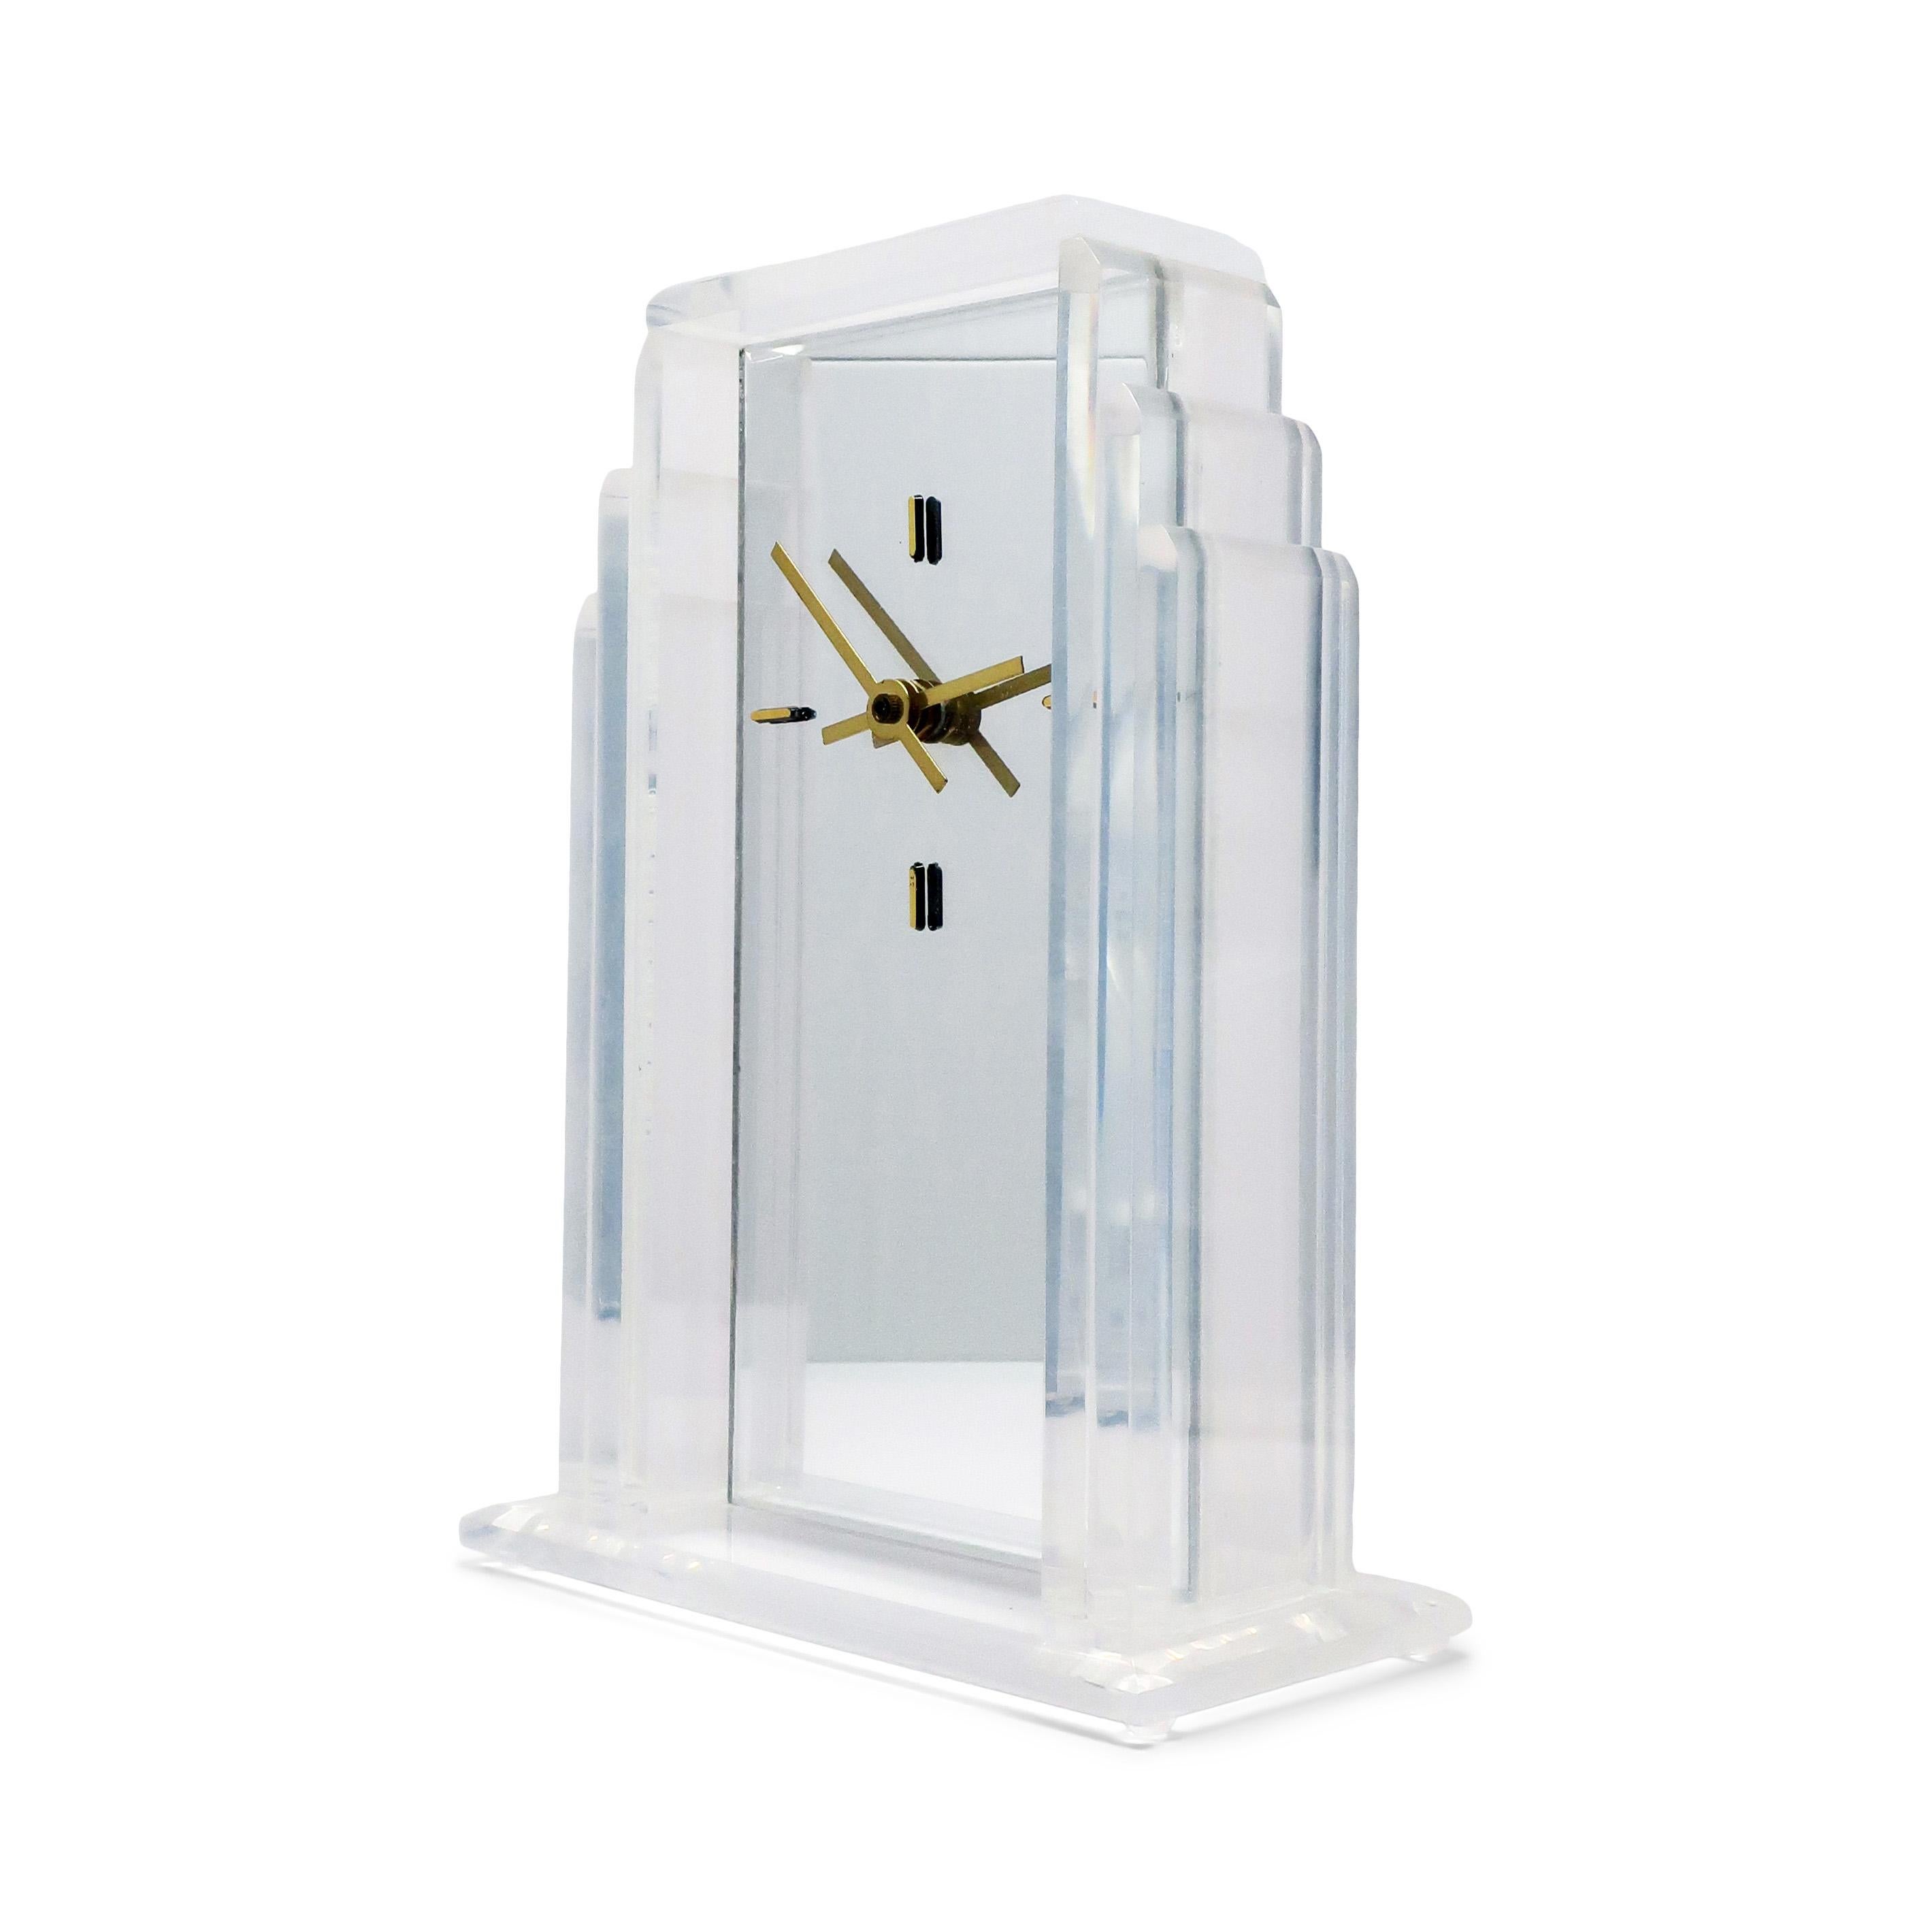 A lovely Art Deco-inspired lucite desk or mantle clock with lucite body and base, mirrored face, brass hands, and brass marks at 3, 6, 9, and 12.

In good vintage condition with wear consistent with age and use. Unsigned.

7.5“ x 3” x 10”